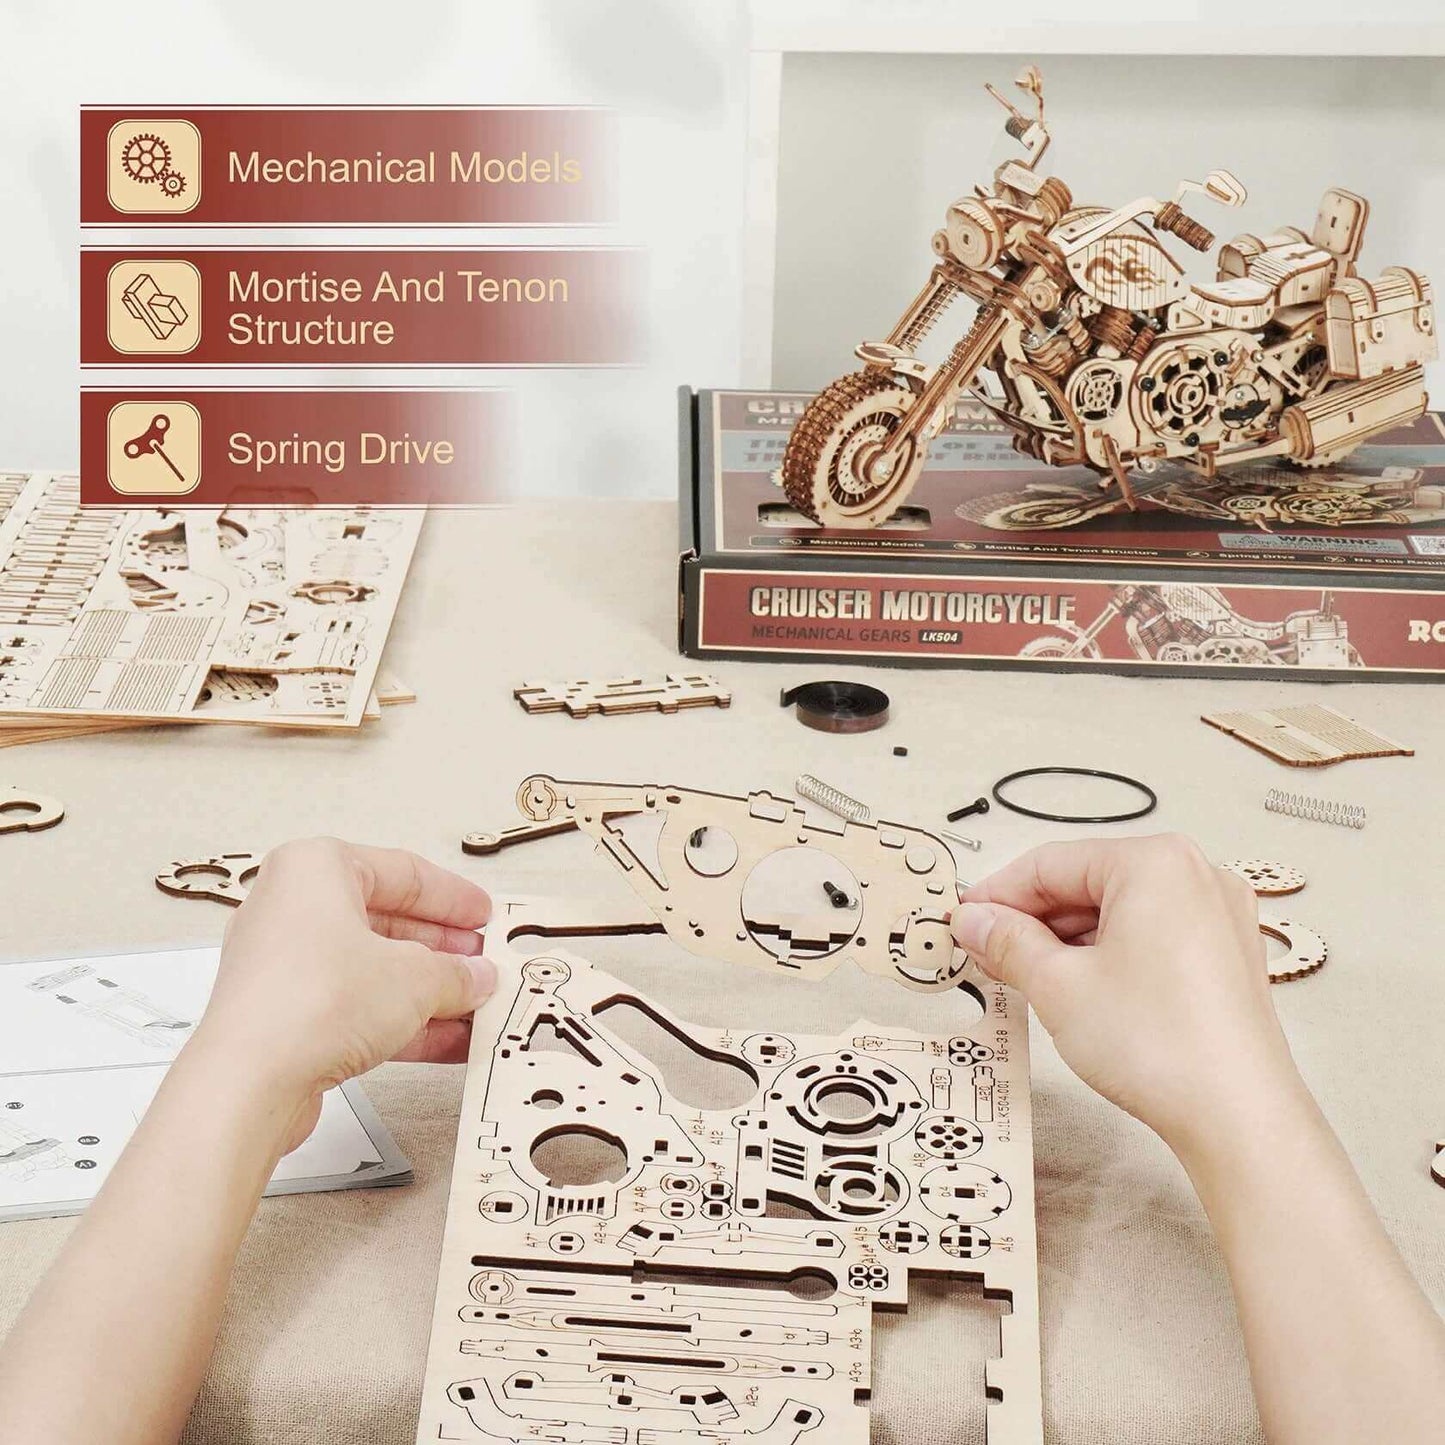 Robotime Rokr LK504 Cruiser Motorcycle DIY Assembly Toy: 420-Piece Wooden Model Building Kit - Ideal Gift for Adults and Children